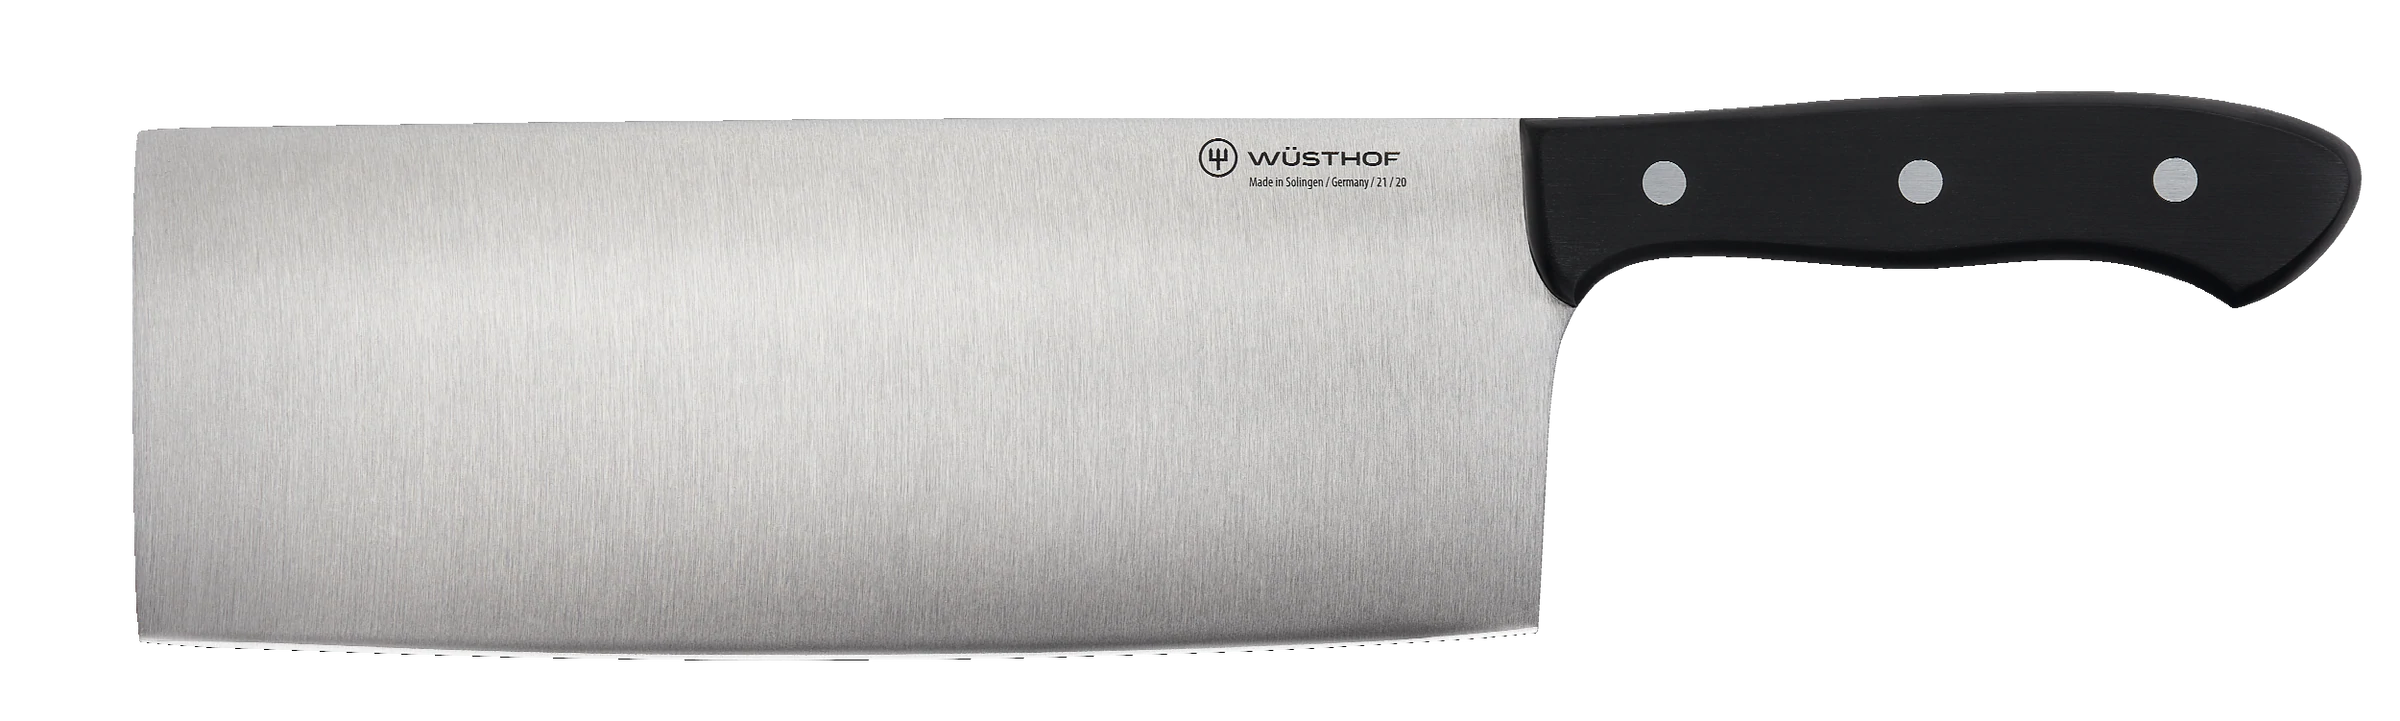 Wusthof Chinese chef's knife 20cm (Blade W77mm) 1129500220